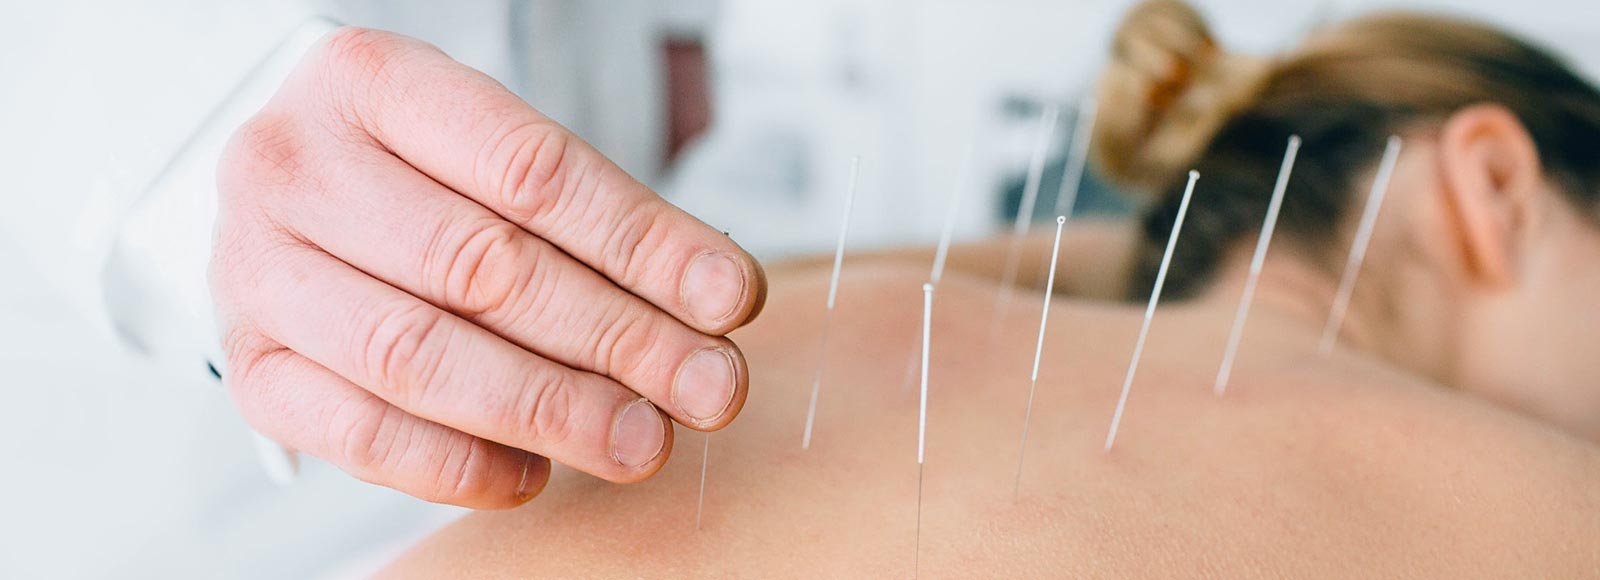 camberwell medical acupuncture